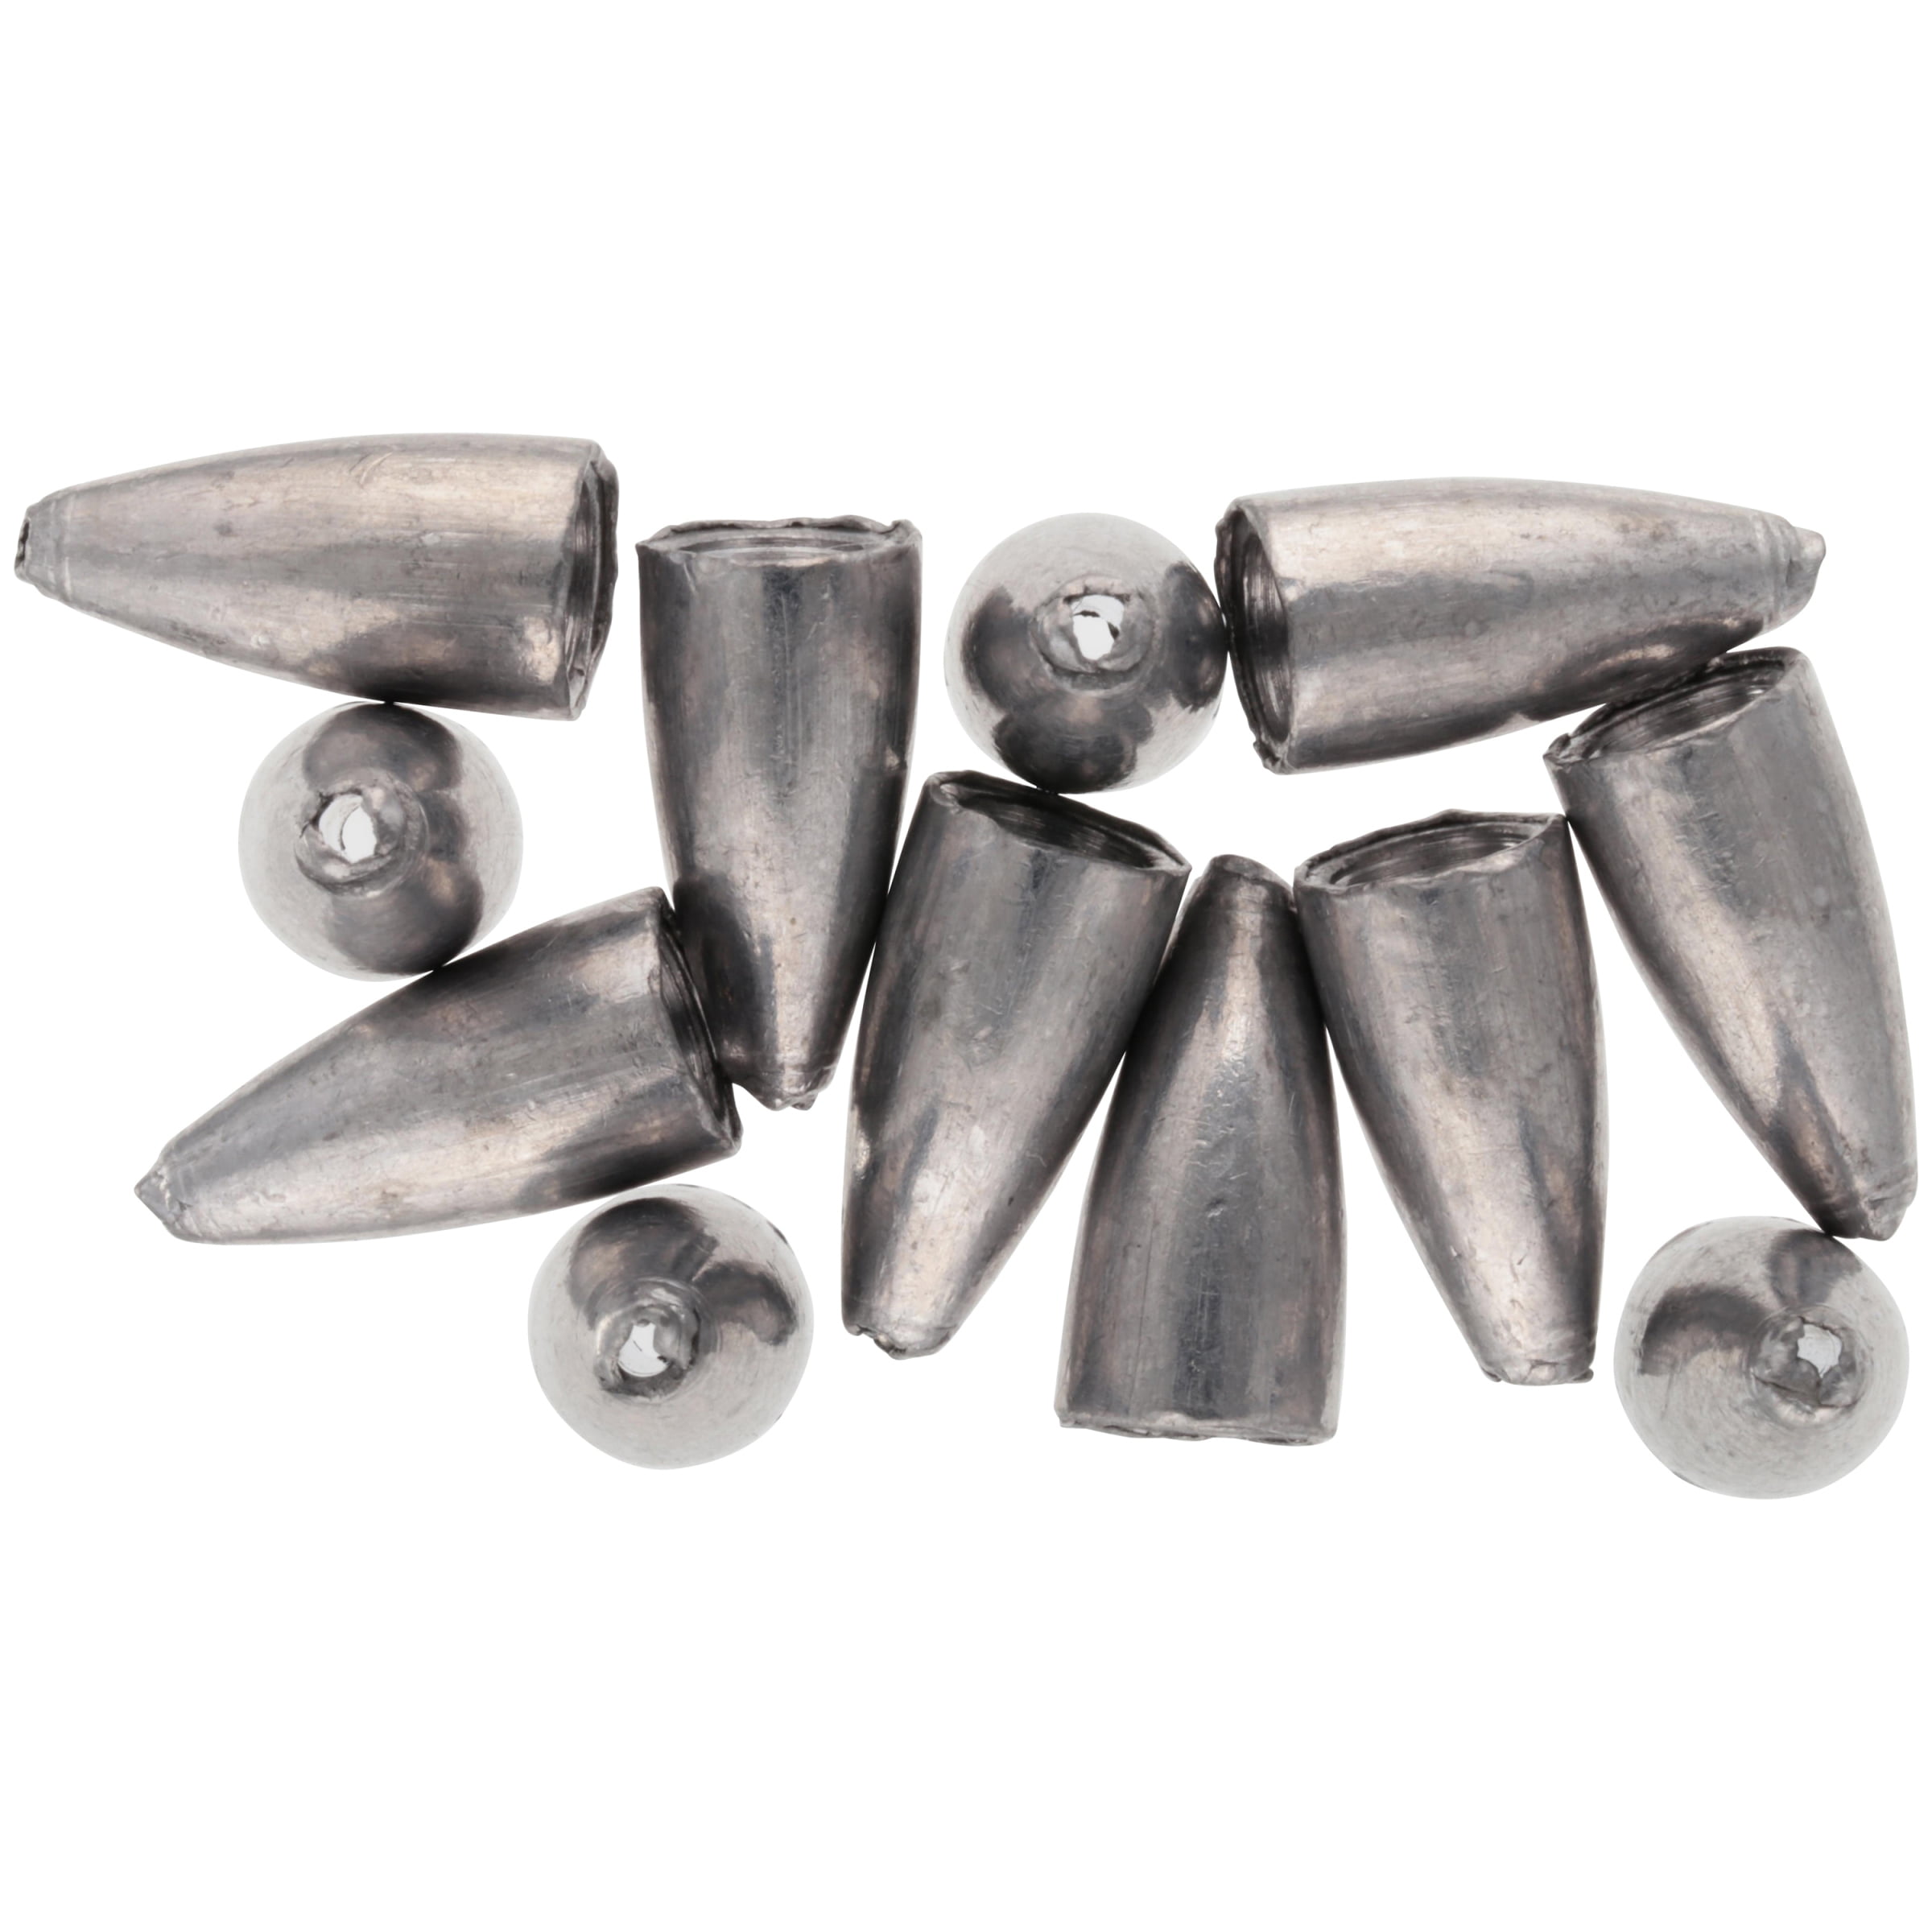 LYMAN 10-1 POUND LEAD INGOTS, FISHING WEIGHTS,SINKERS OR BULLETS, CLEAN AND  SOFT